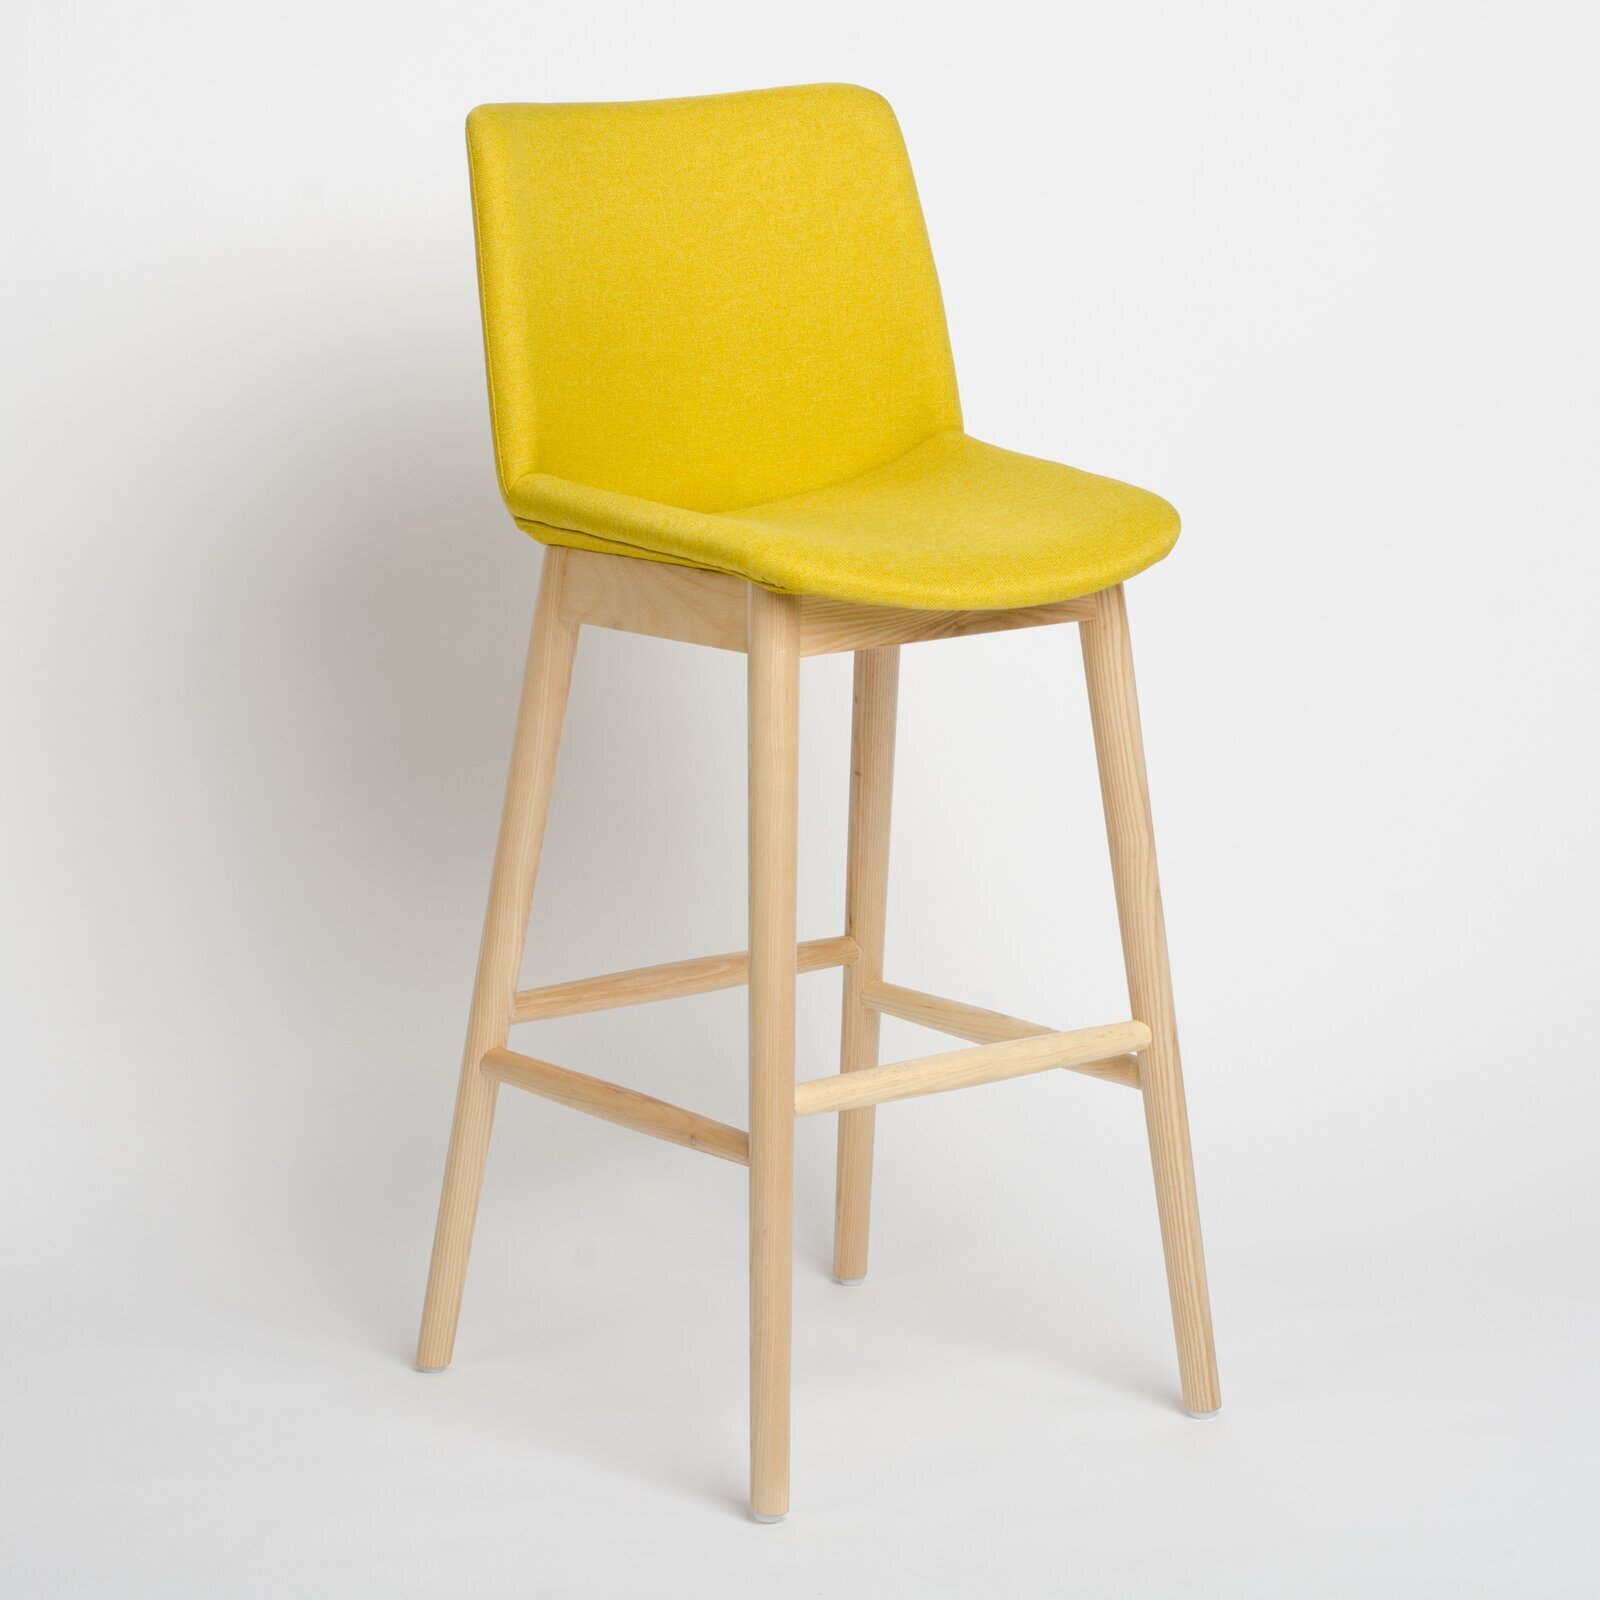 Flip Back Maple Stool with Stool Top Color Choices